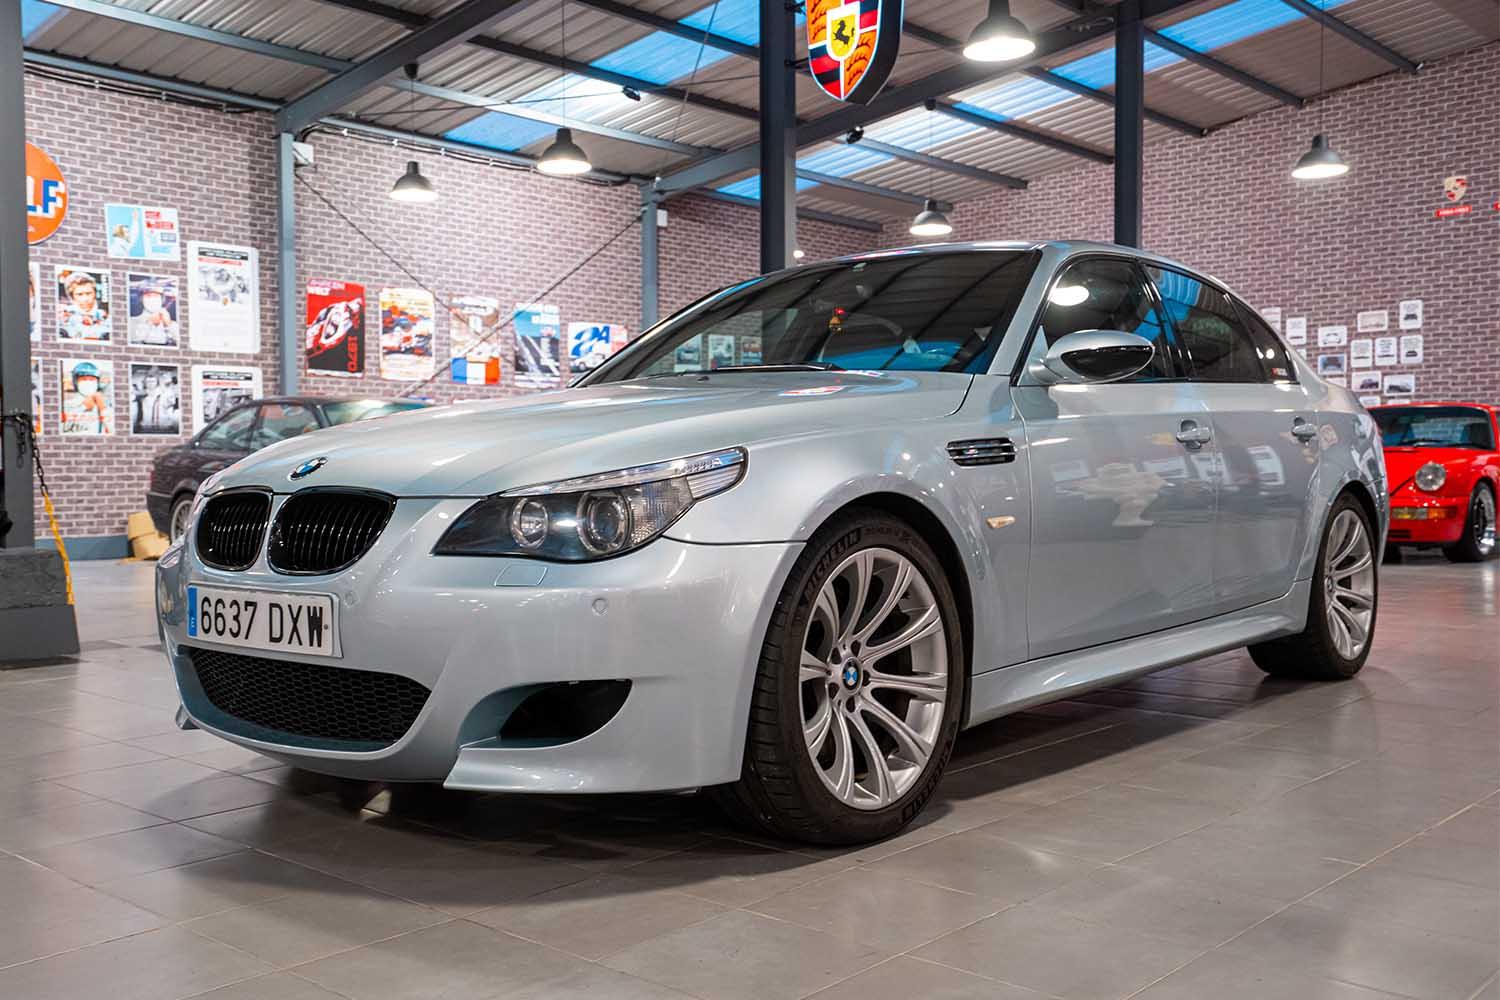 This BMW 525 is looking for a new home. 2.5 diesel, manual gearbox